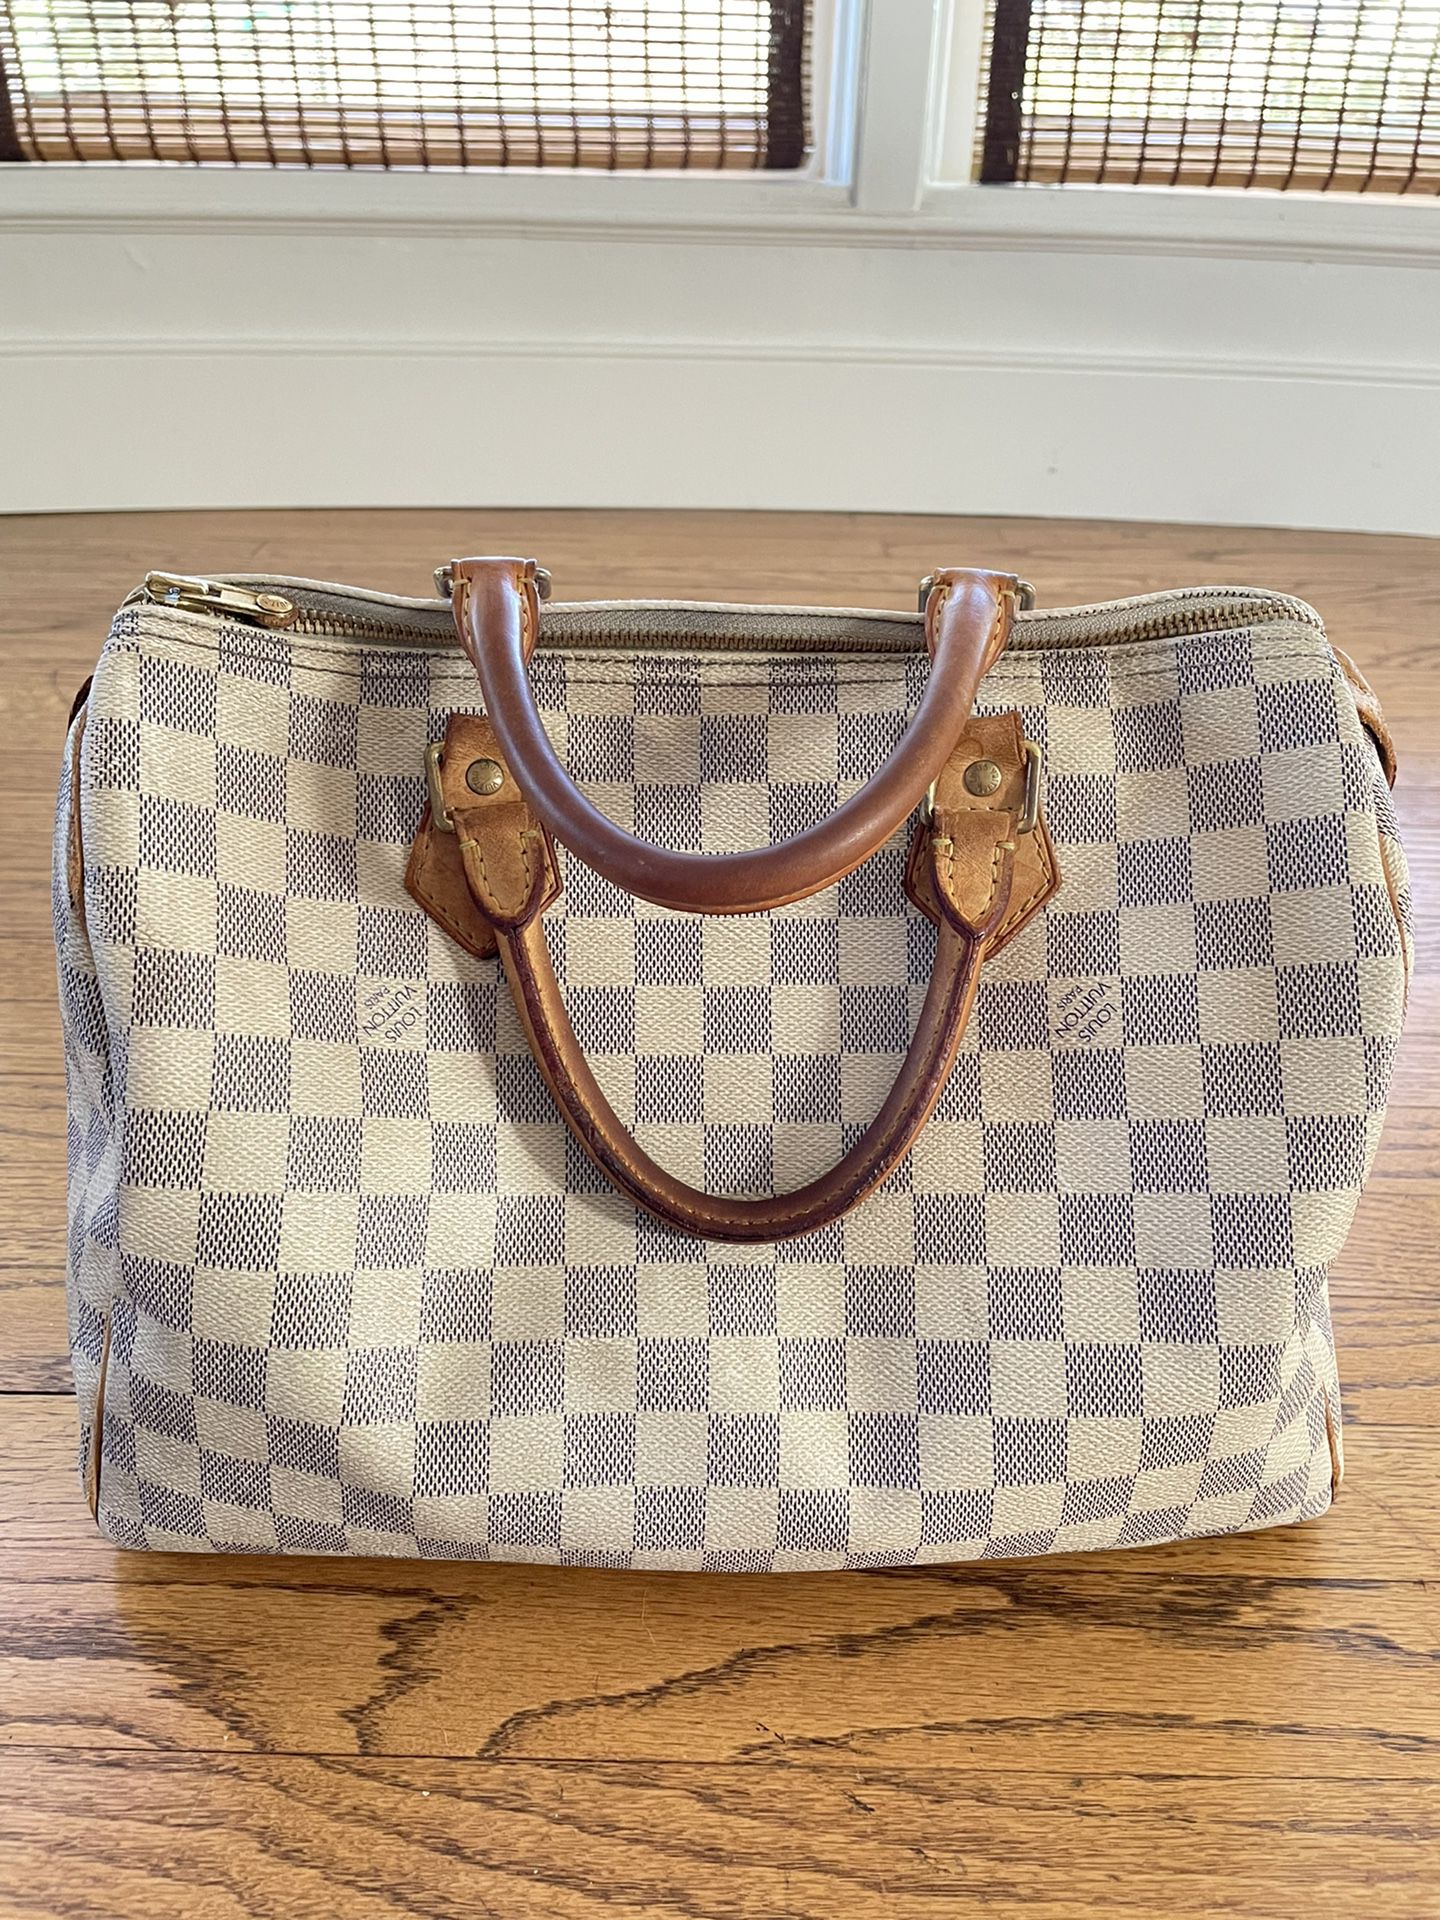 Tory floral speedy bag for Sale in Seal Beach, CA - OfferUp